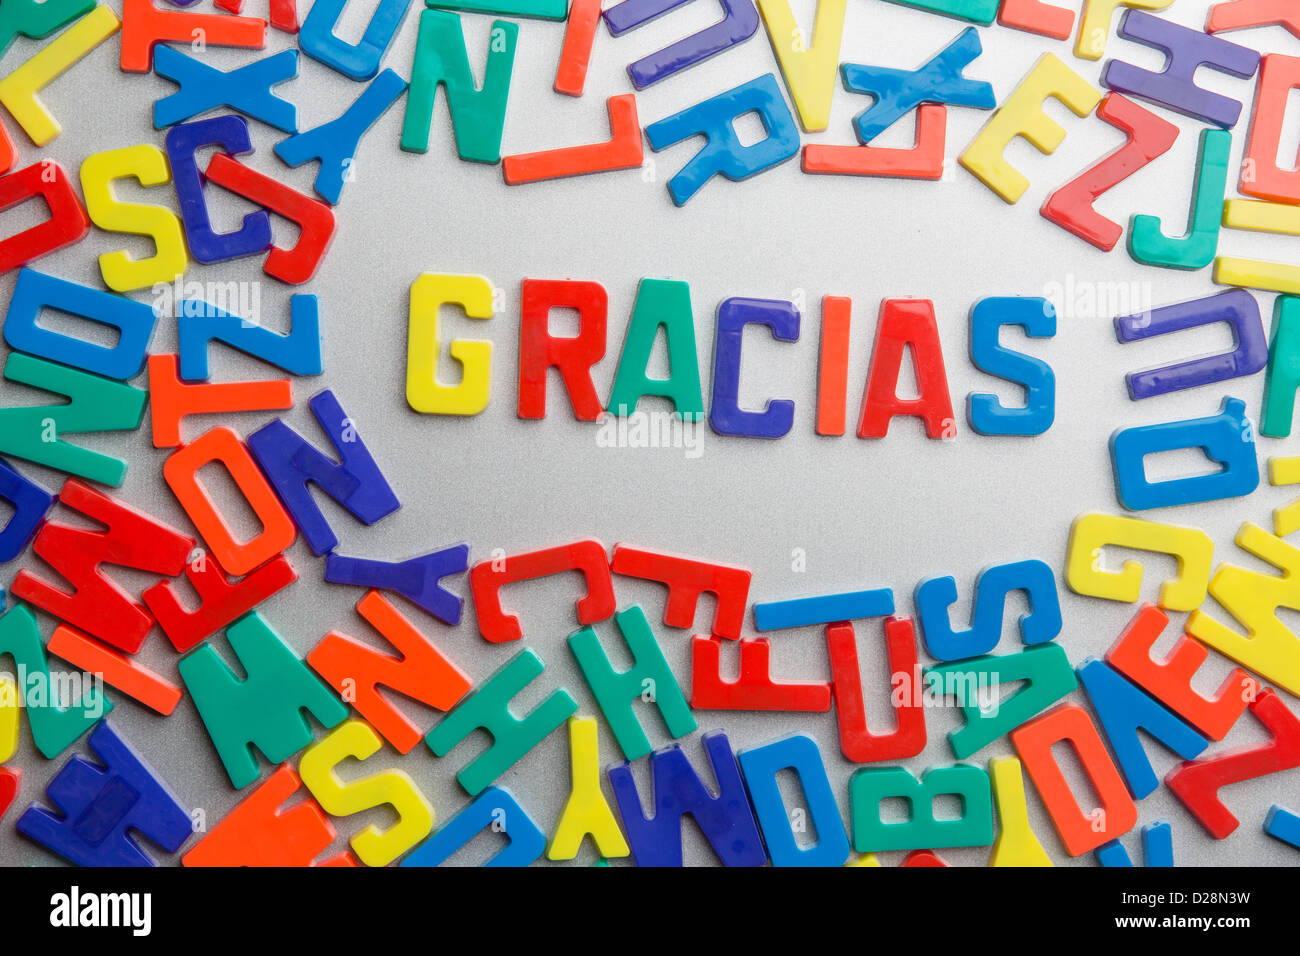 'Gracias' - Refrigerator magnets spell a message out of a jumble of letters Stock Photo